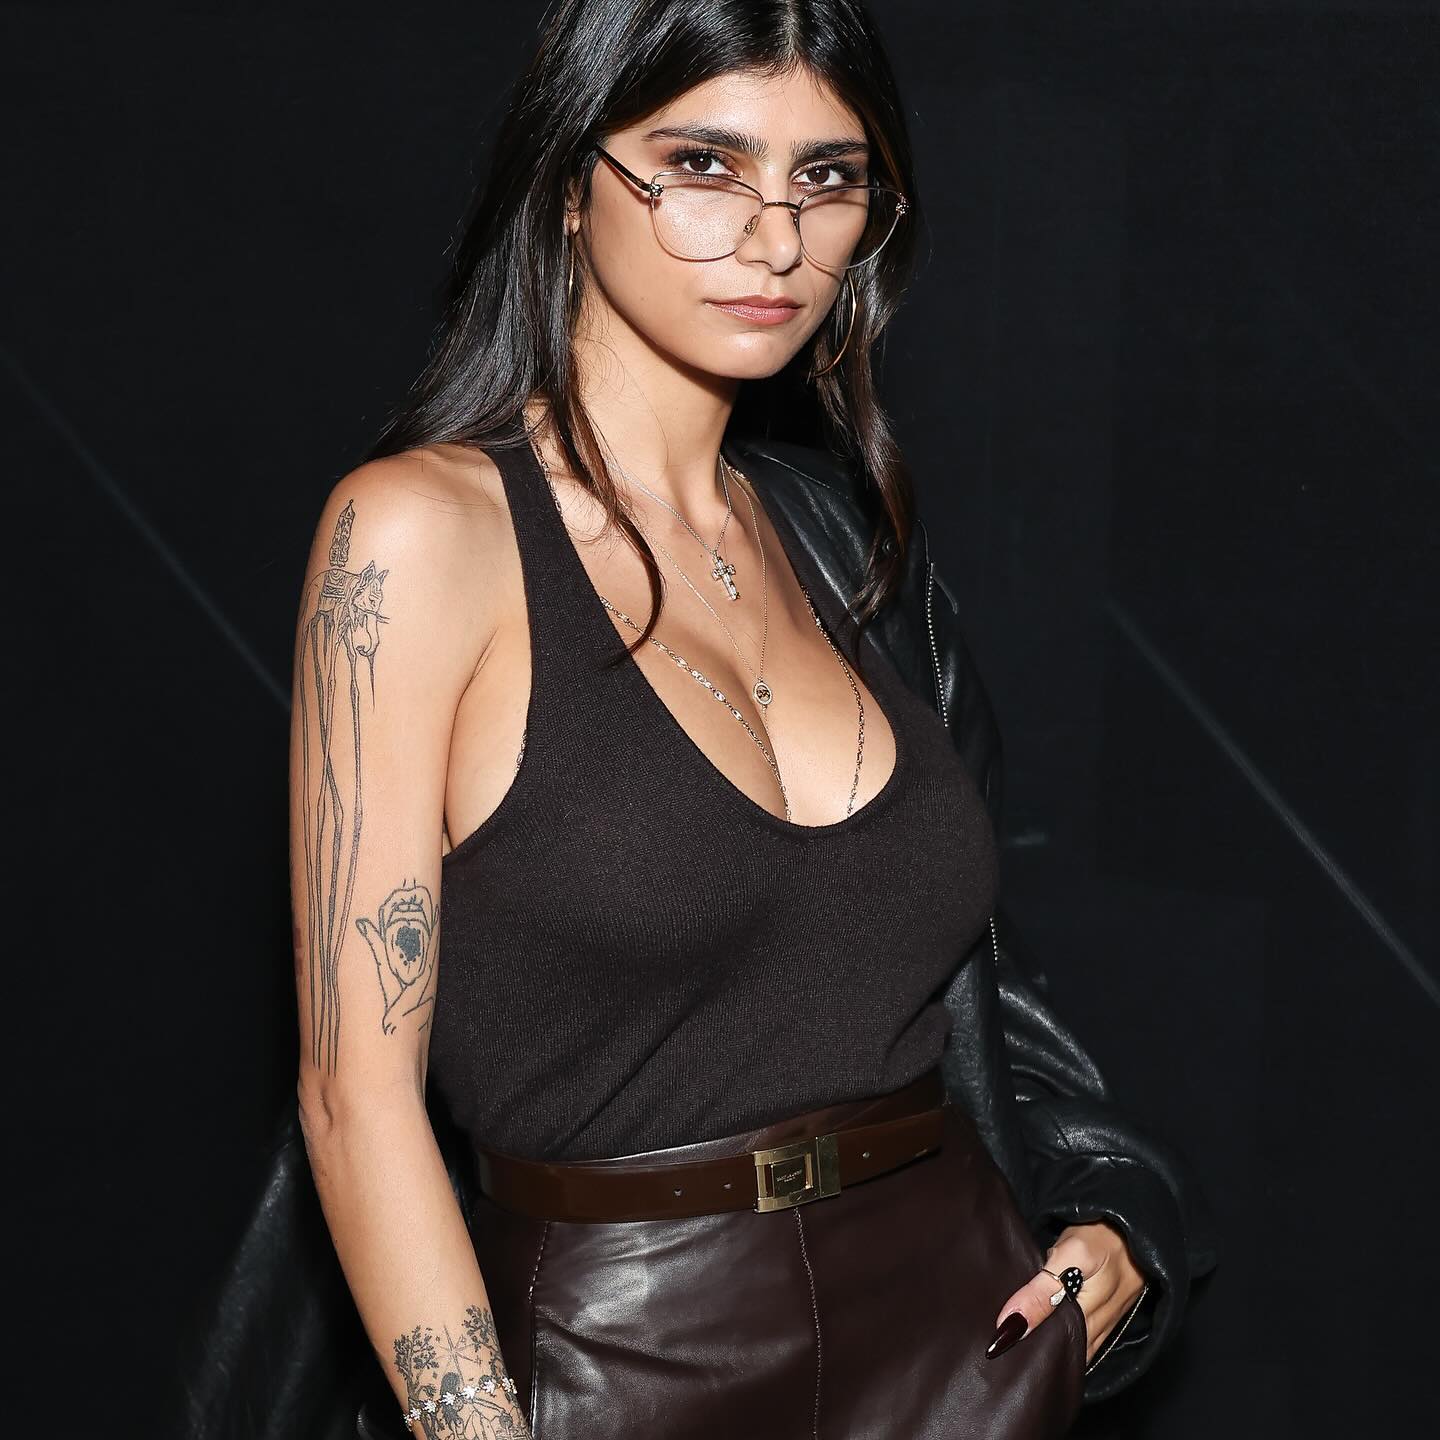 From #Pornhub sensation to #jewellery designer and, most recently of all, runway #model, Mia Khalifa had the world at her feet until she tweeted support for #Palestine in October. Subsequently cancelled from both her podcast show and #Playboy online, she remains ever defiant. Check out the all-encompassing interview she granted us and why we deemed her an ‘Ultimate Disruptor’ in the ULTIMATE AWARDS issue in stores.

#OfficialBespoke #UltimateAwardsIssue #Luxury #Lifestyle #MiddleEast #MiaKhalifa #Ultimate #Disruptor